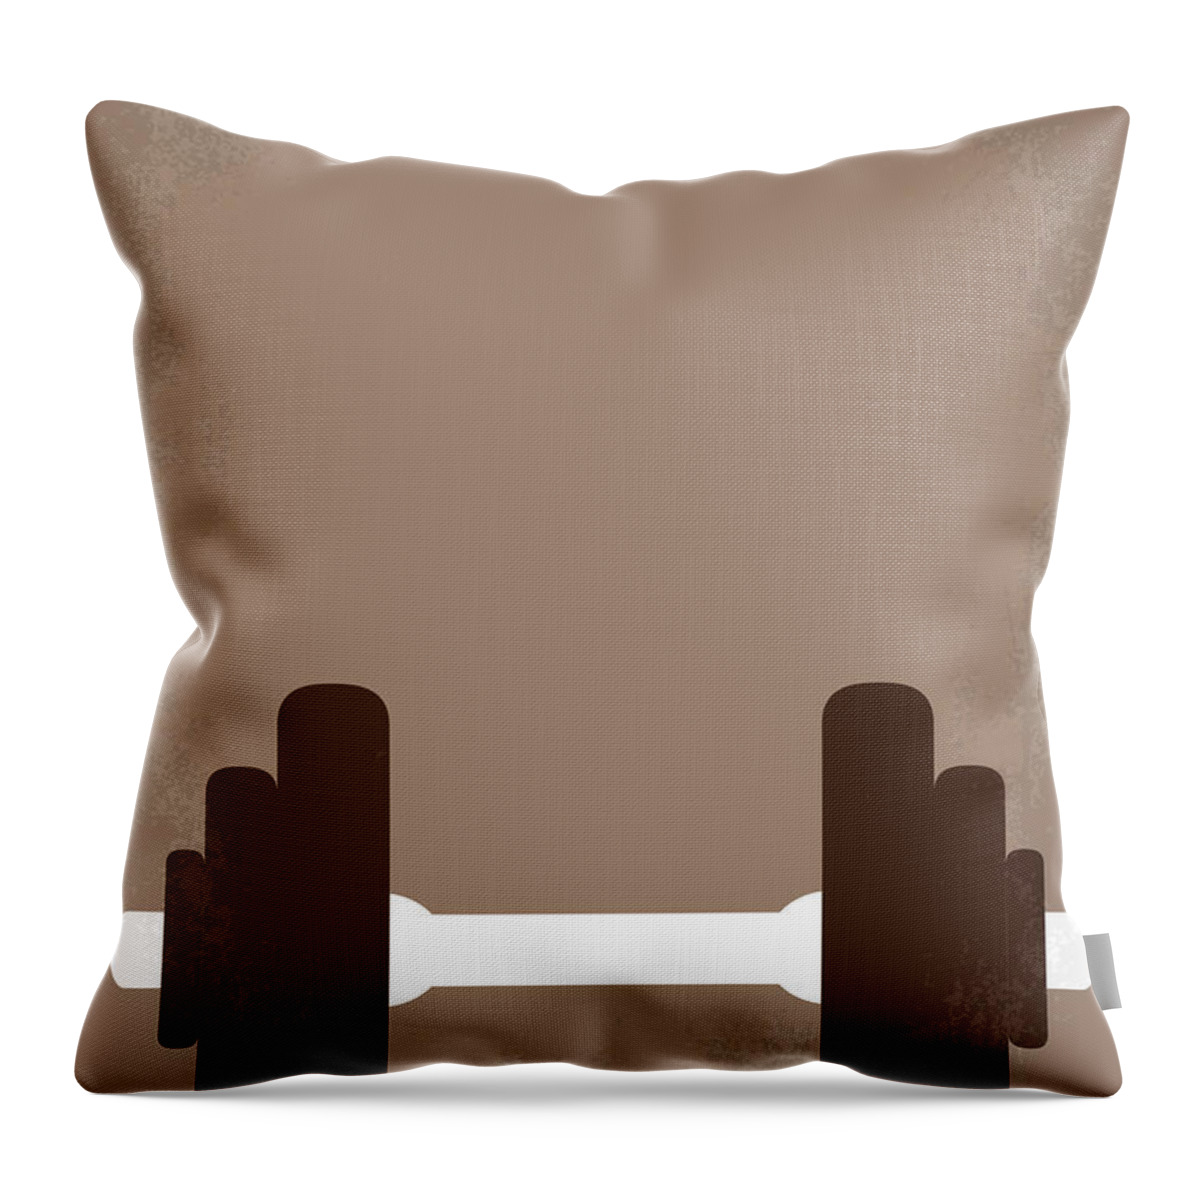 Pumping Throw Pillow featuring the digital art No707 My Pumping Iron minimal movie poster by Chungkong Art